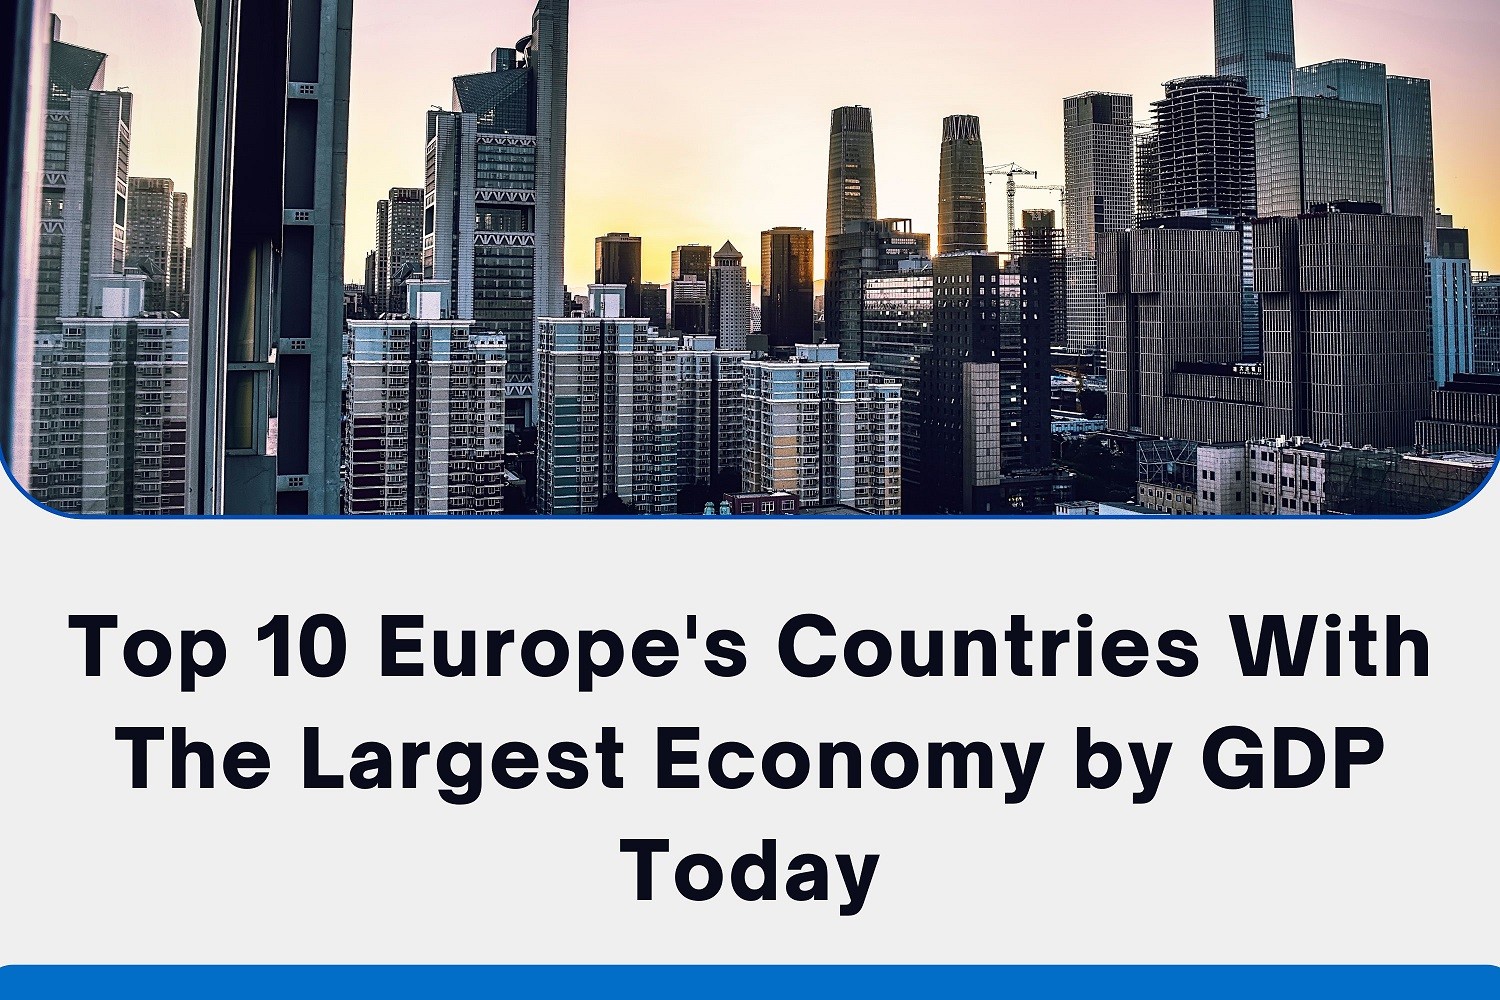 Top 10 Europe's Countries With The Largest Economy by GDP Today